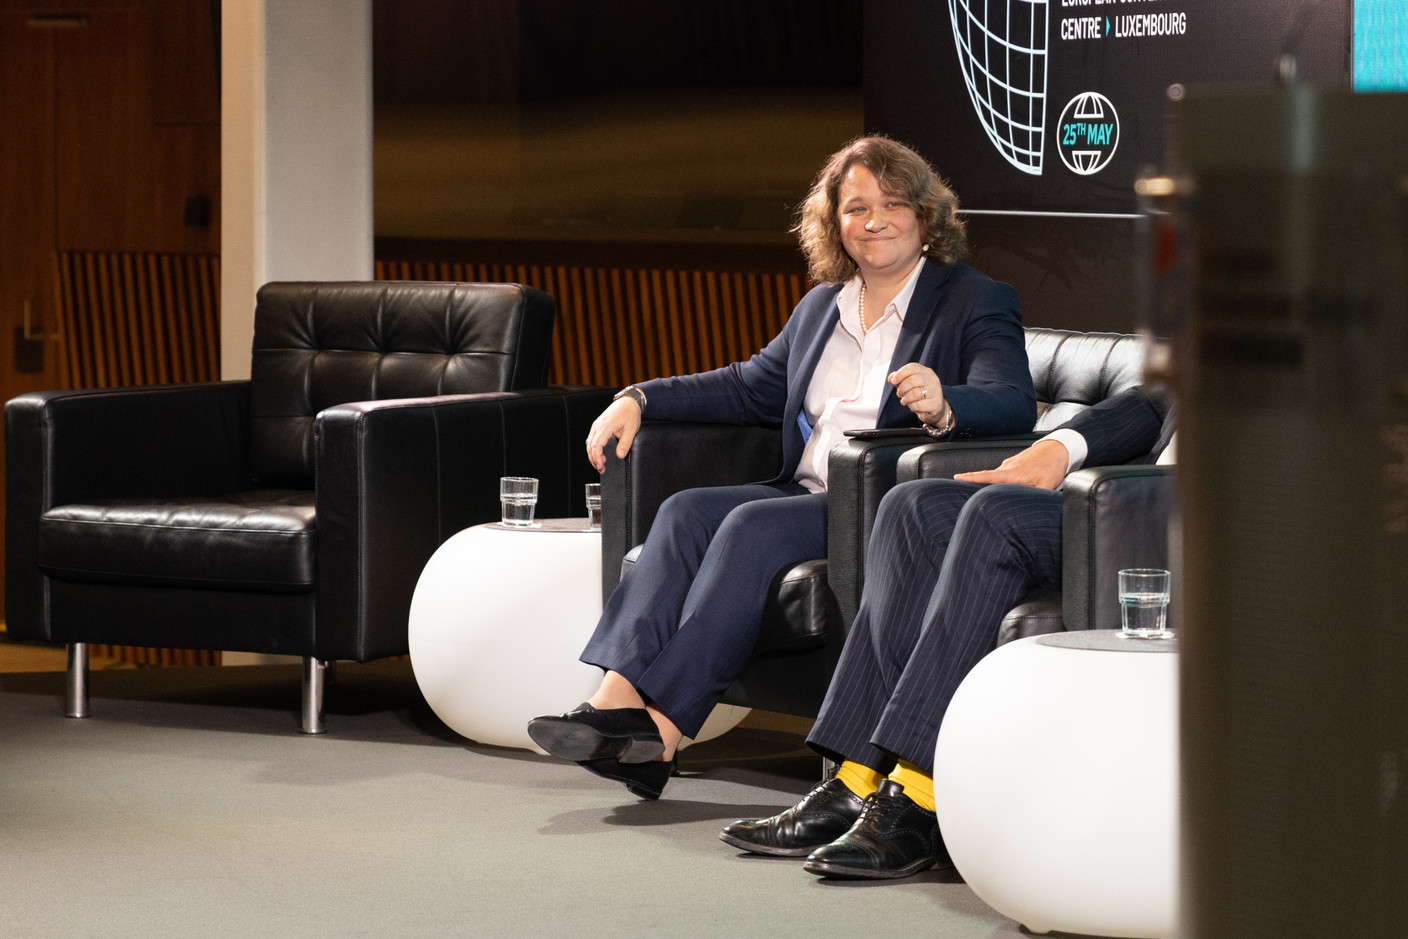 Davina Goodall-Smith, chief operating officer, EMEA, Nikko Asset Management, seen during the “From Bull to Bear--will market volatility create new opportunities?” panel at the Cross-Border Distribution Conference, 25 May 2023. Photo: Romain Gamba